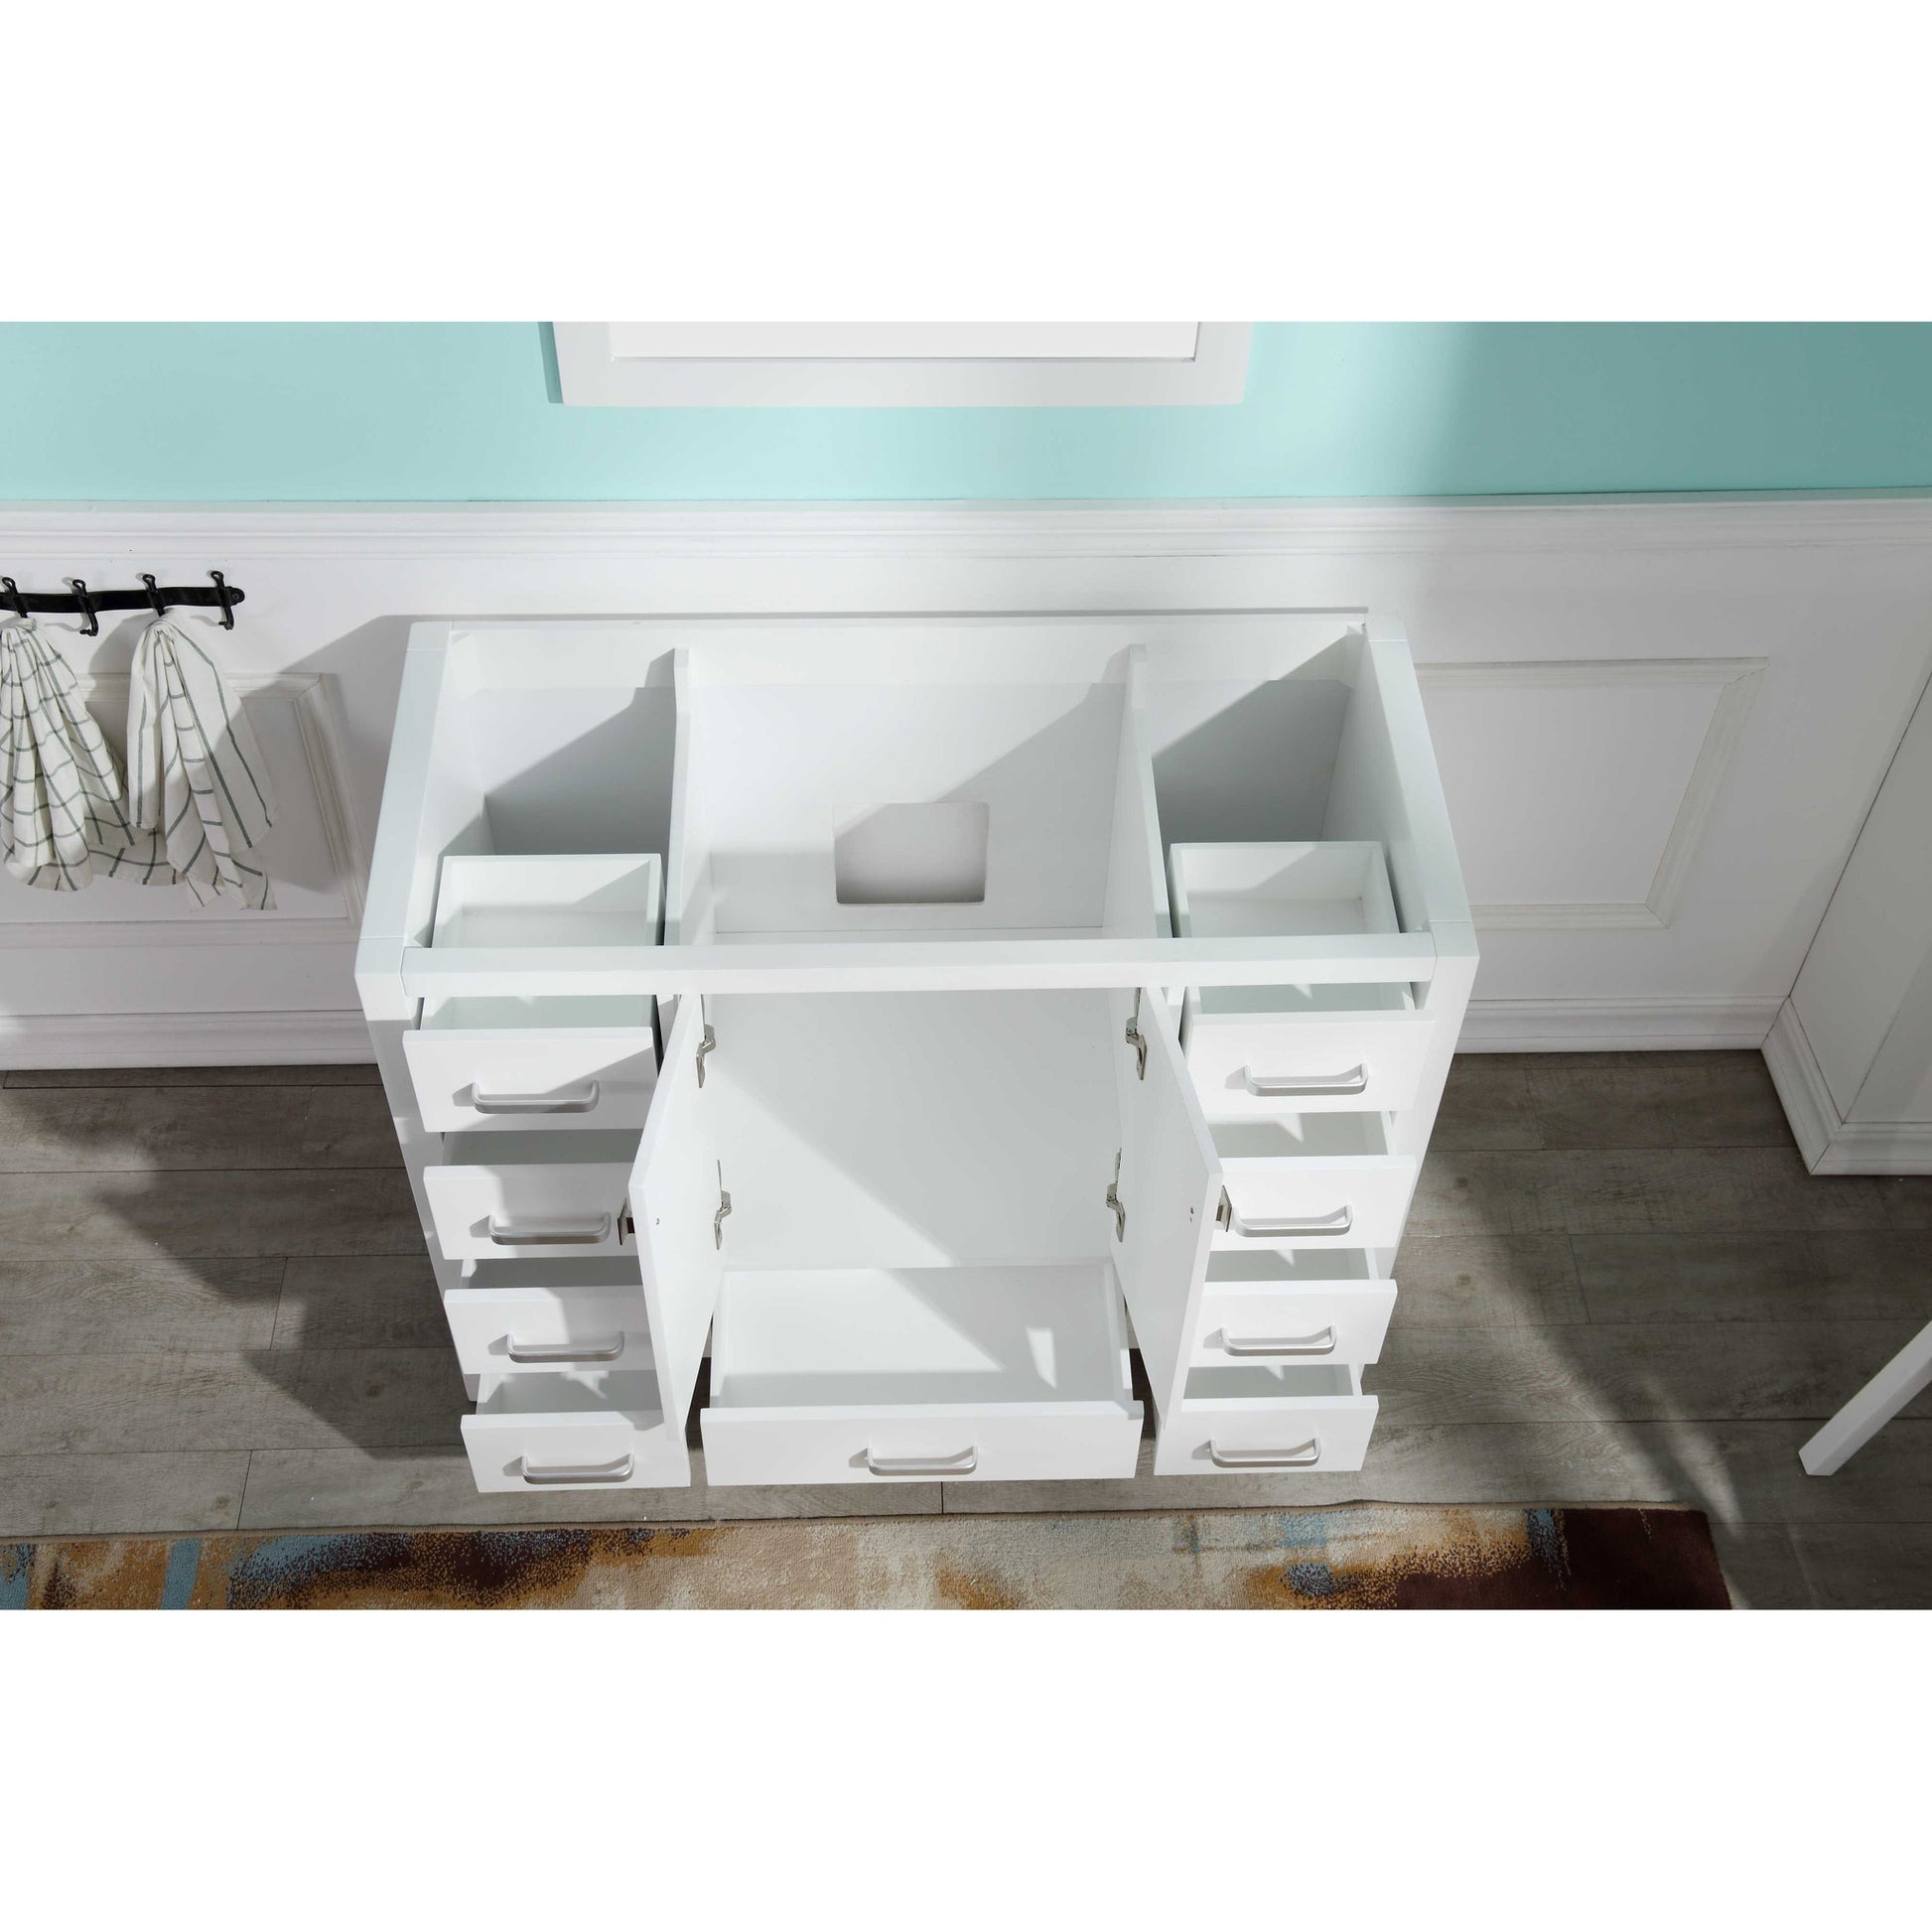 ANZZI Chateau Series 48" x 36" Rich White Solid Wood Bathroom Vanity With White Carrara Marble Countertop, Basin Sink and Mirror